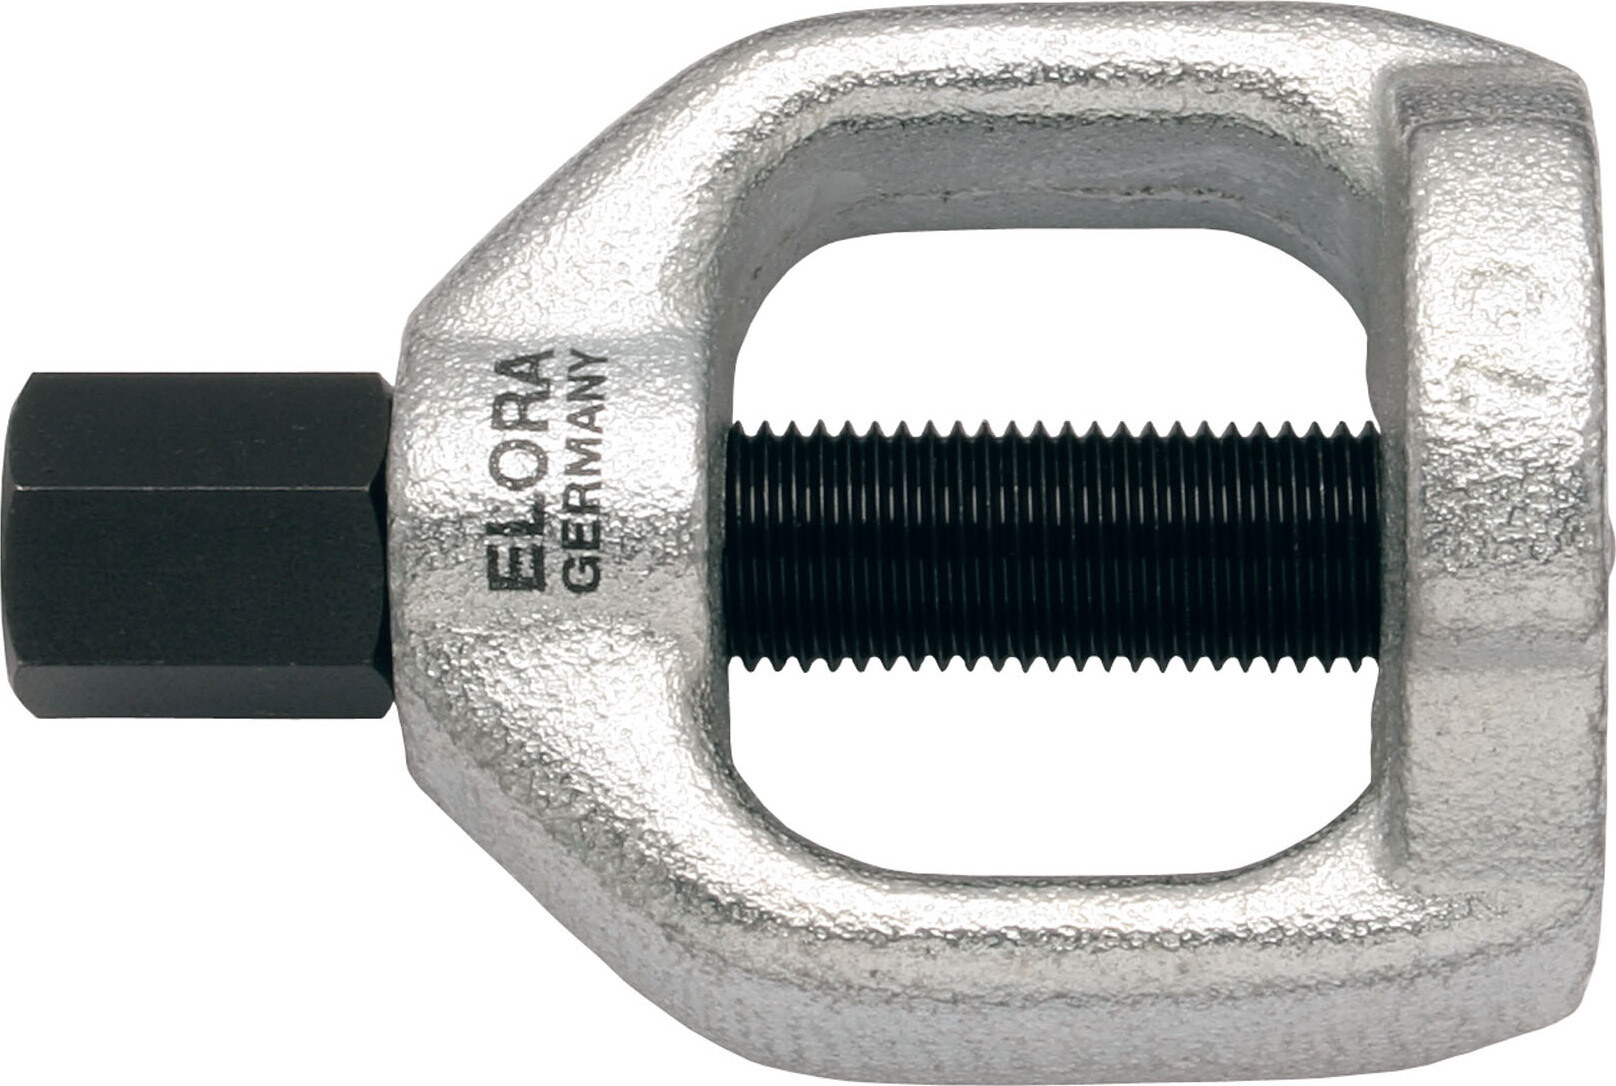 ELORA-168-23 mm Joint Bolt Puller - Click Image to Close